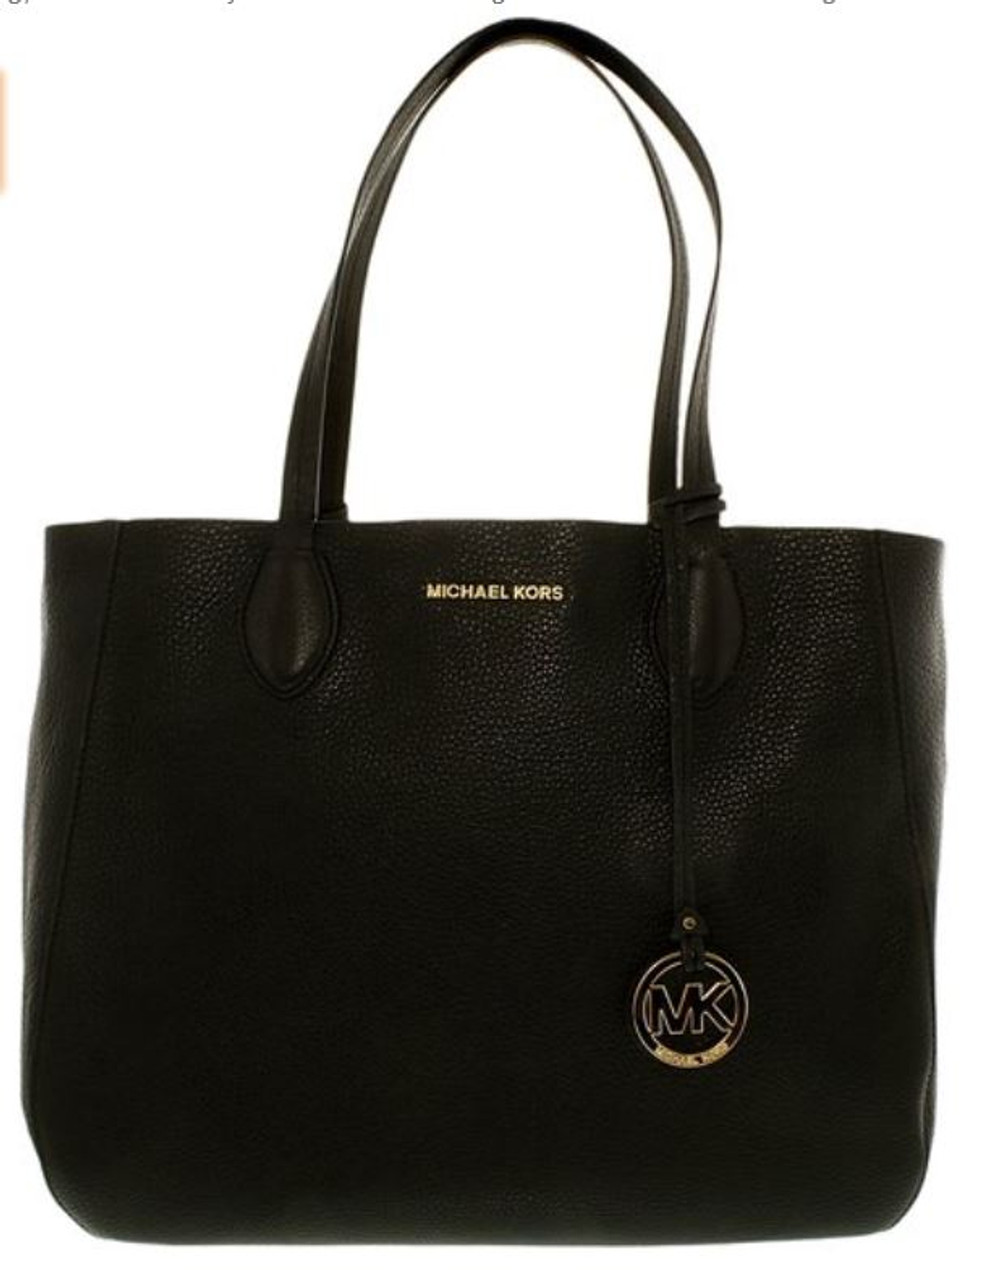 Michael Kors Women's Large Mae Soft Leather Carryall Leather Shoulder Tote  - Black/Pale Gold …